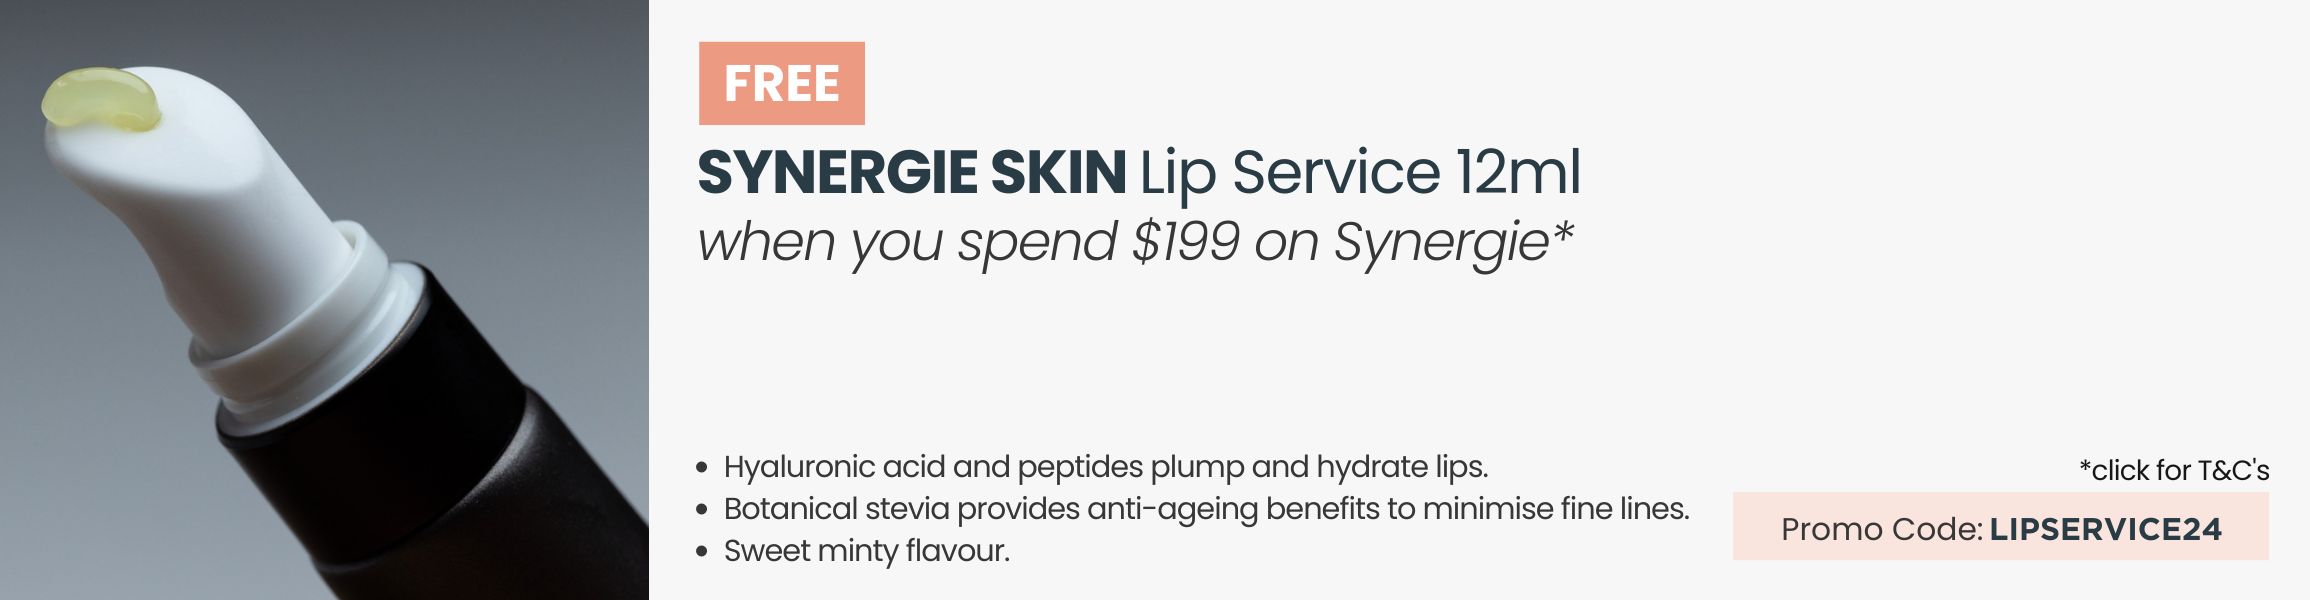 FREE Synergie Skin Lip Service 12ml worth $49. Min spend $199 on Synergie. Promo Code: LIPSERVICE24